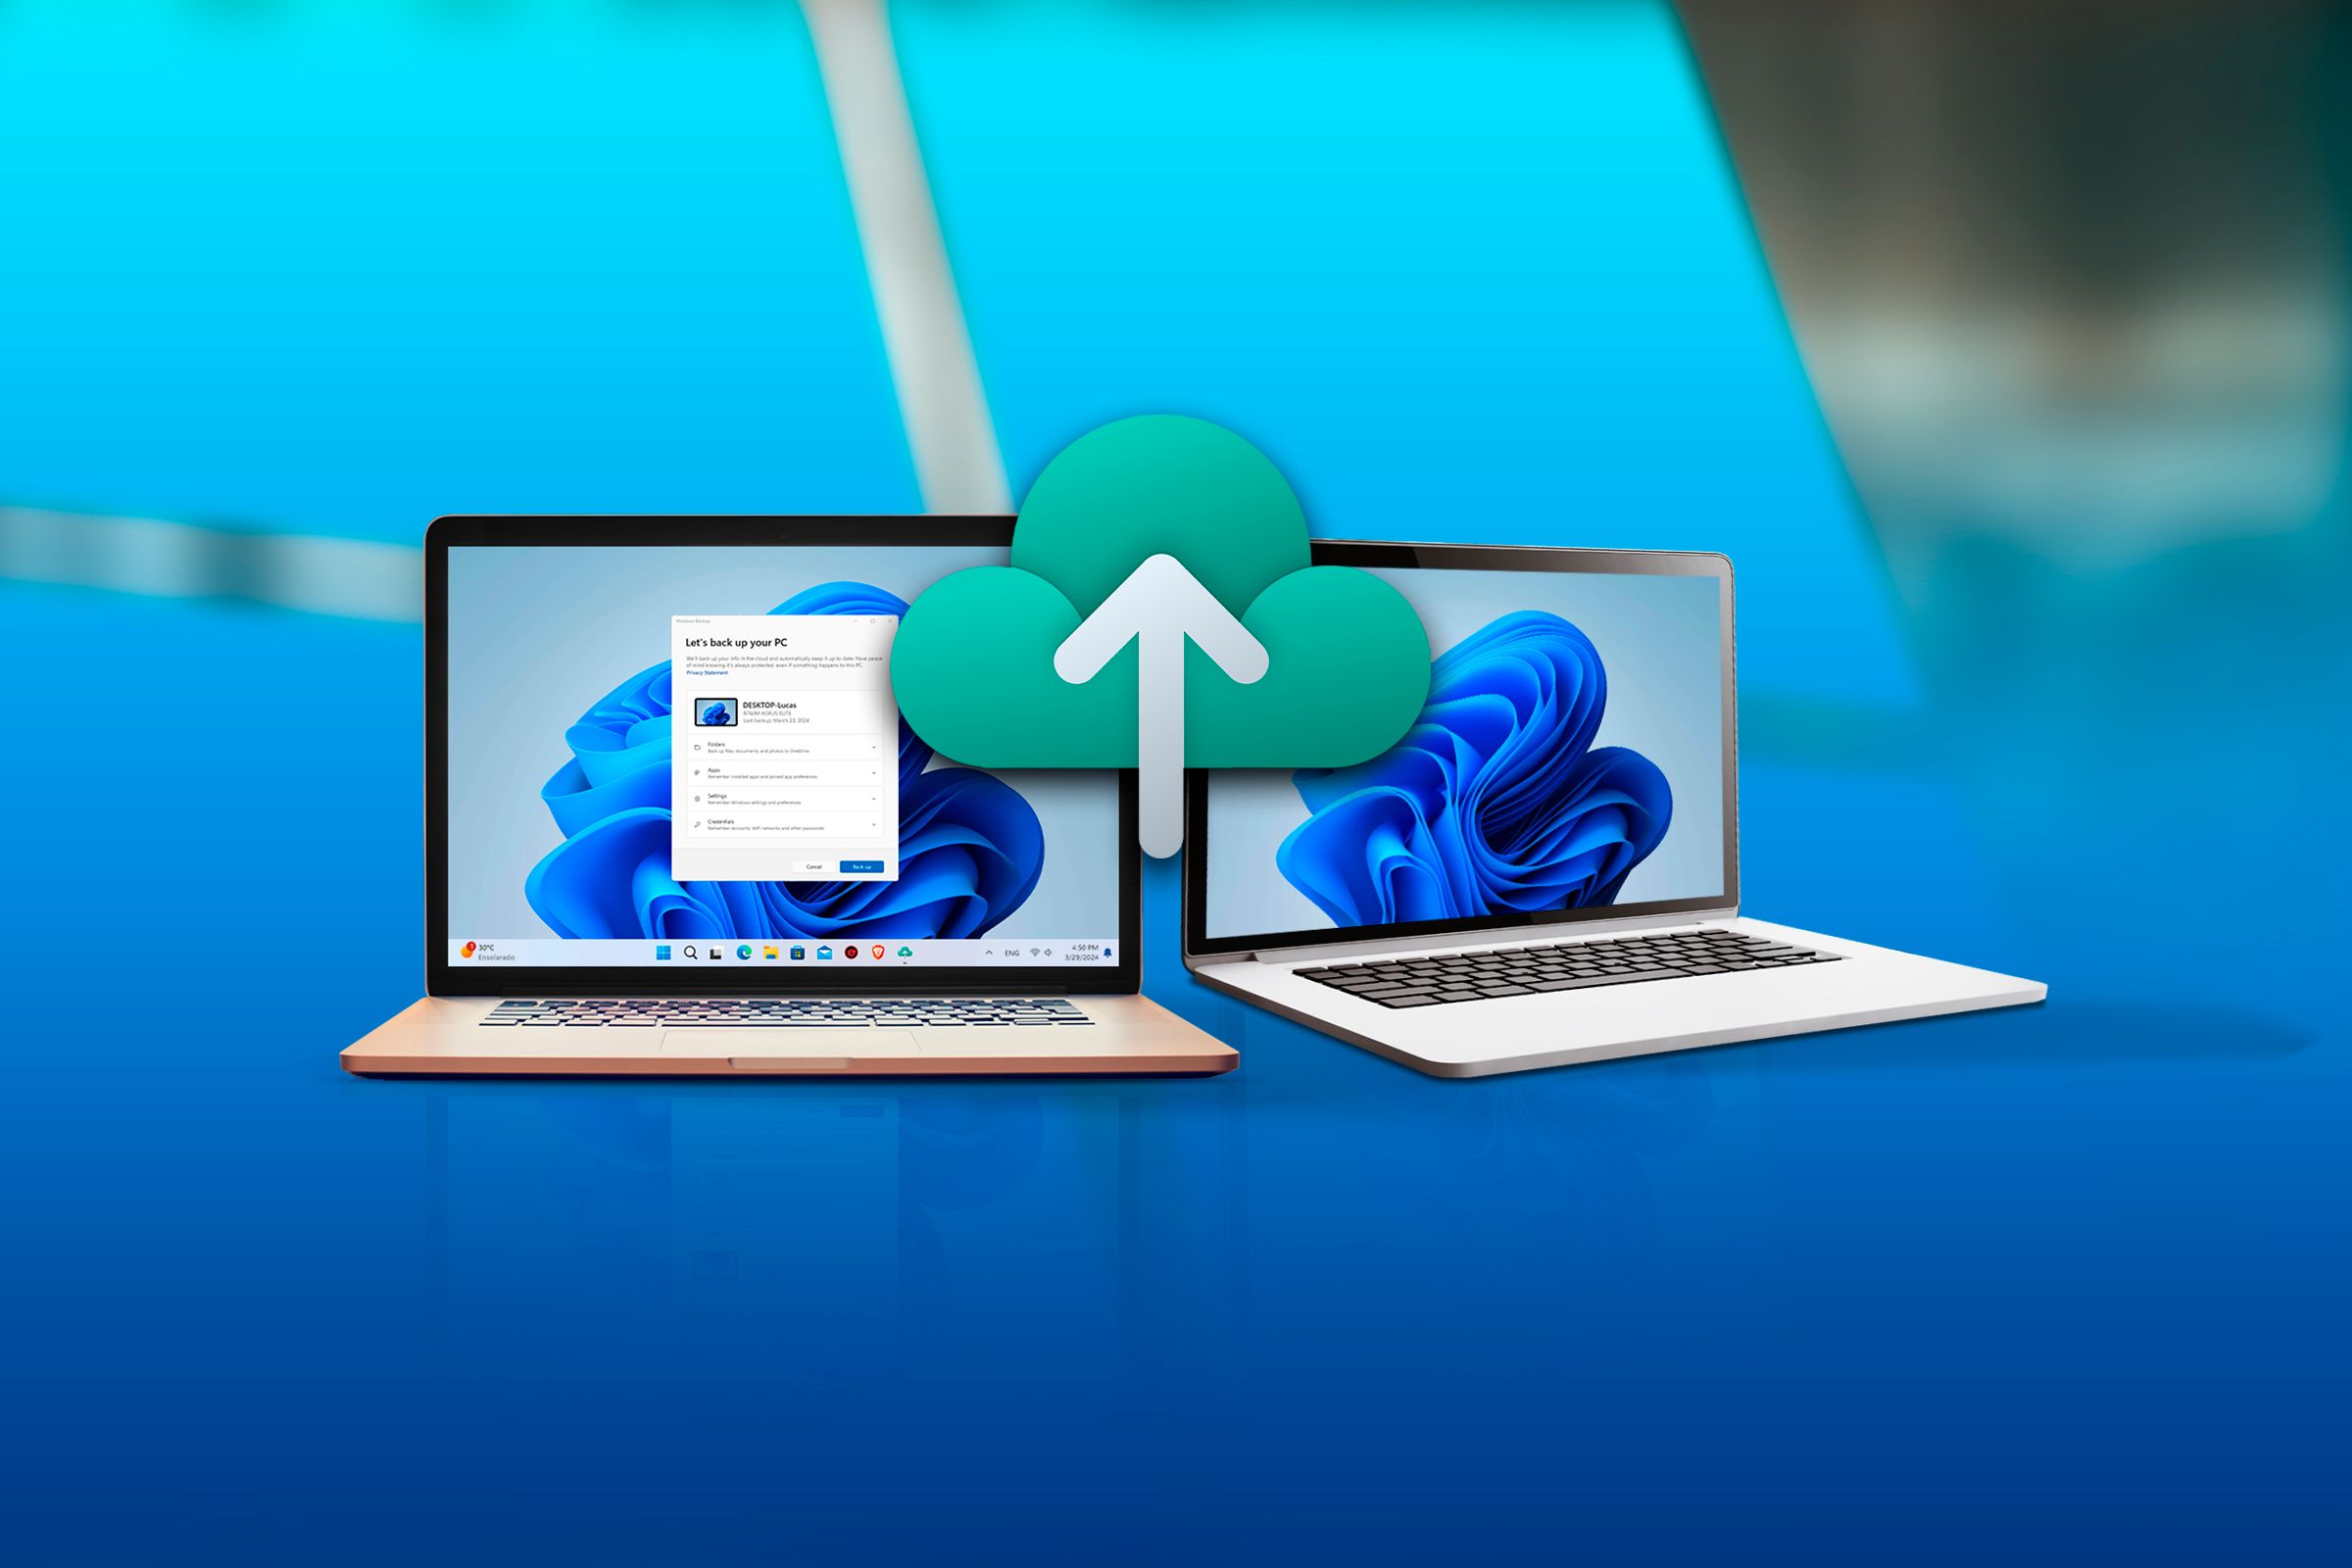 The windows backup logo in the center and behind, two laptops, the right one with the windows default wallpaper, and the left one with the windows backup screen.